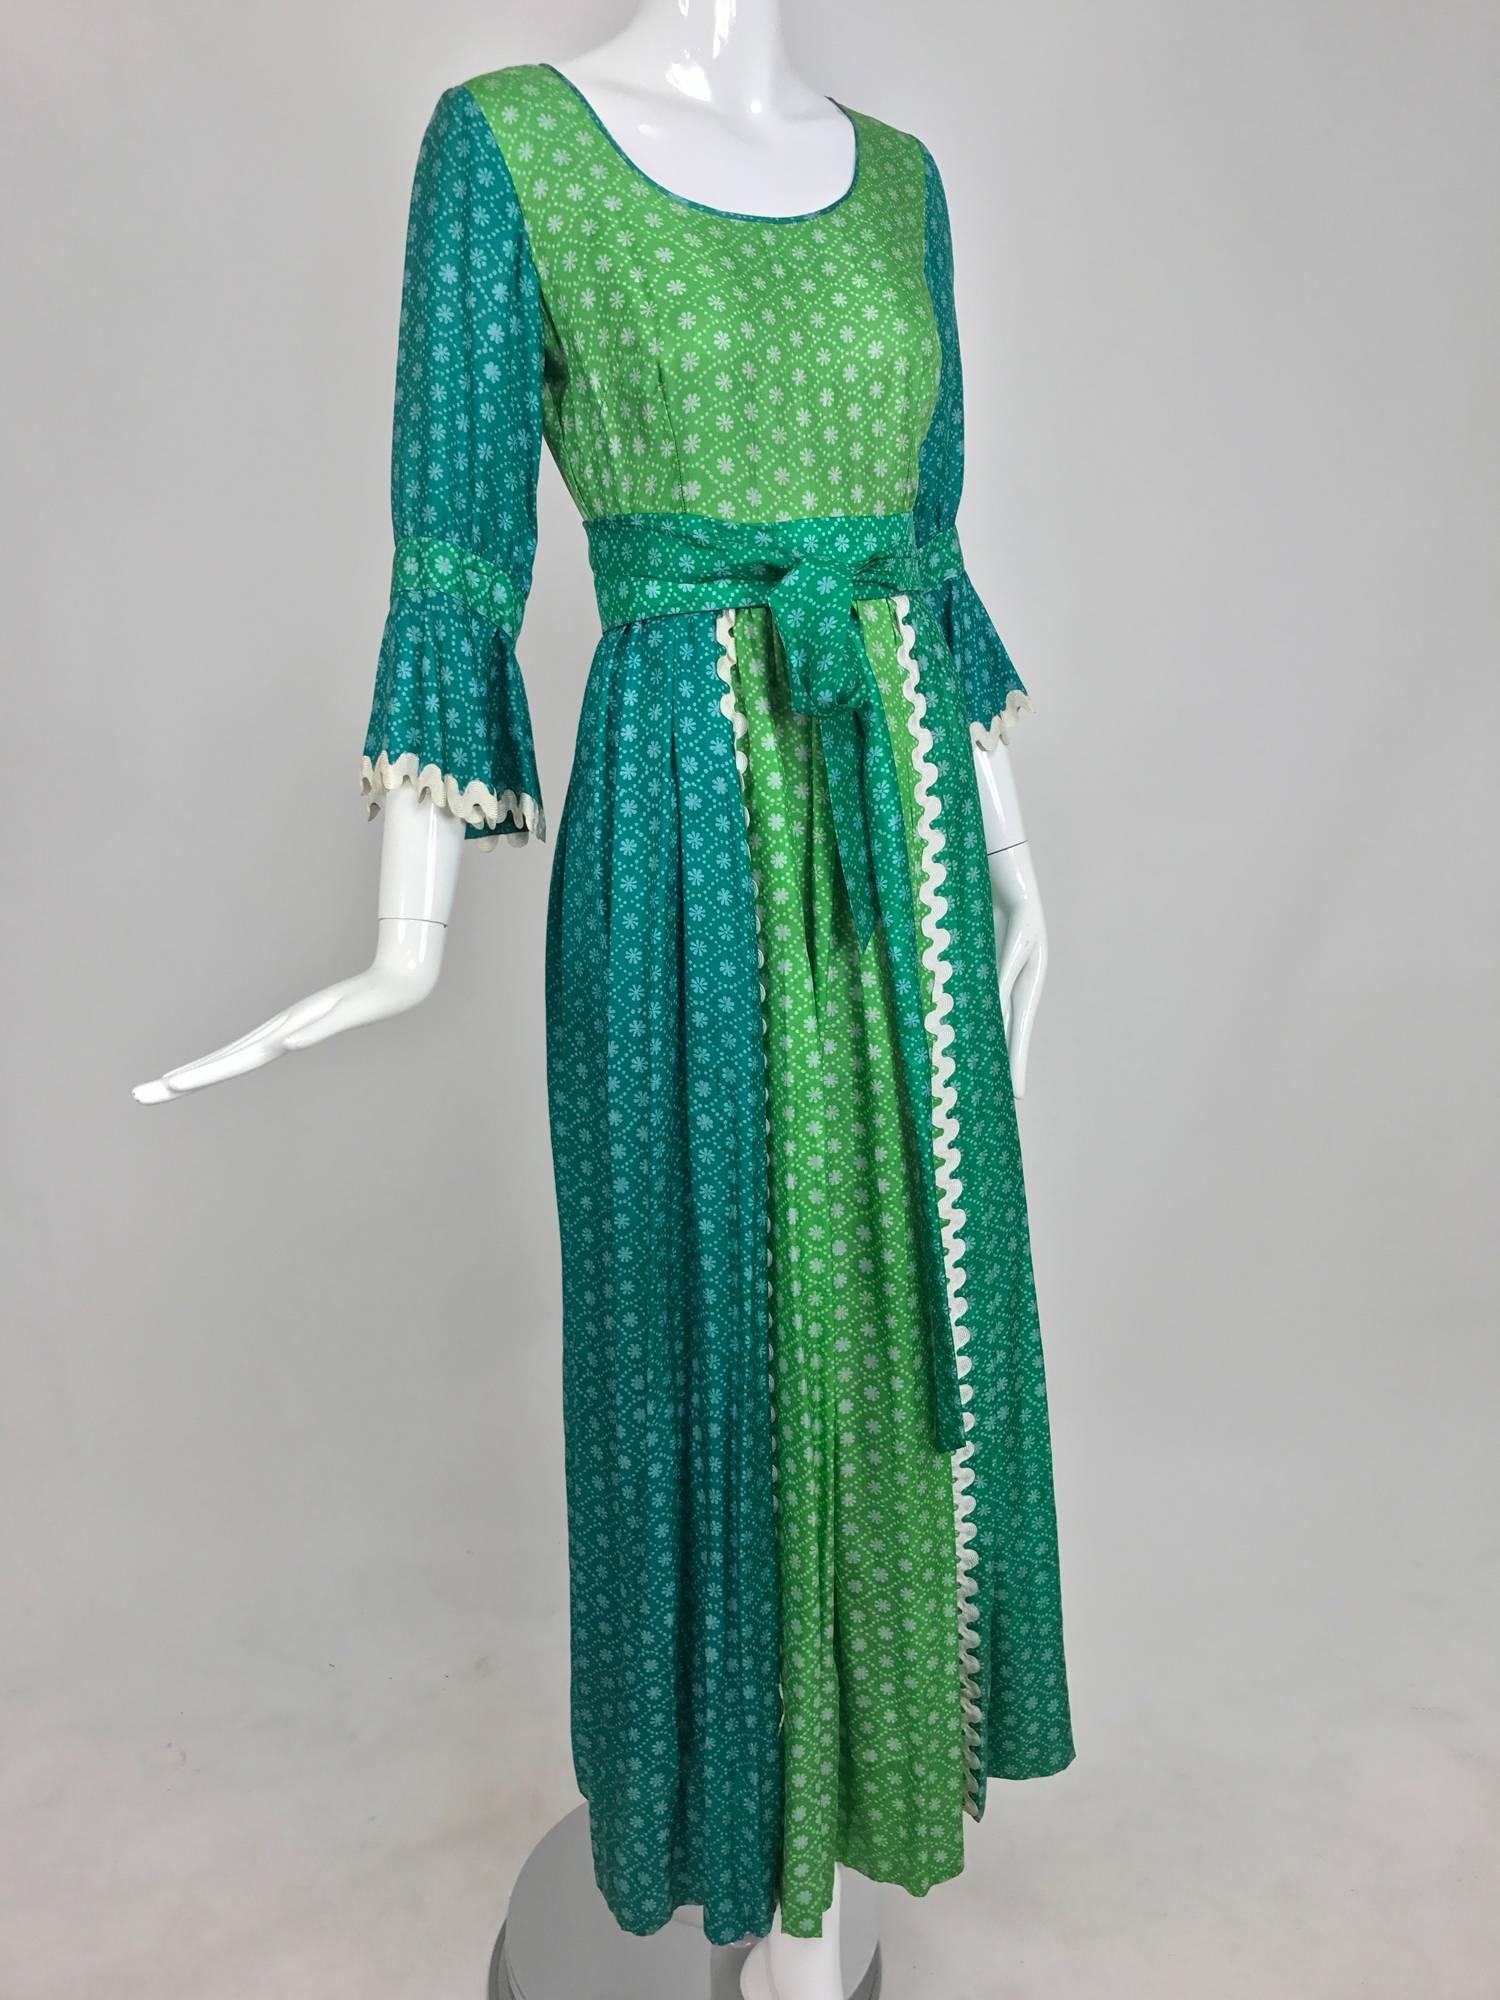 Vintage aqua and green silk print maxi dress with white trim 1970s...Labeled the Mirrors...Scoop neck fitted bodice with 3/4 length sleeves that have a band and ruffle below...The attached skirt is gathered at the waist and falls semi full to the